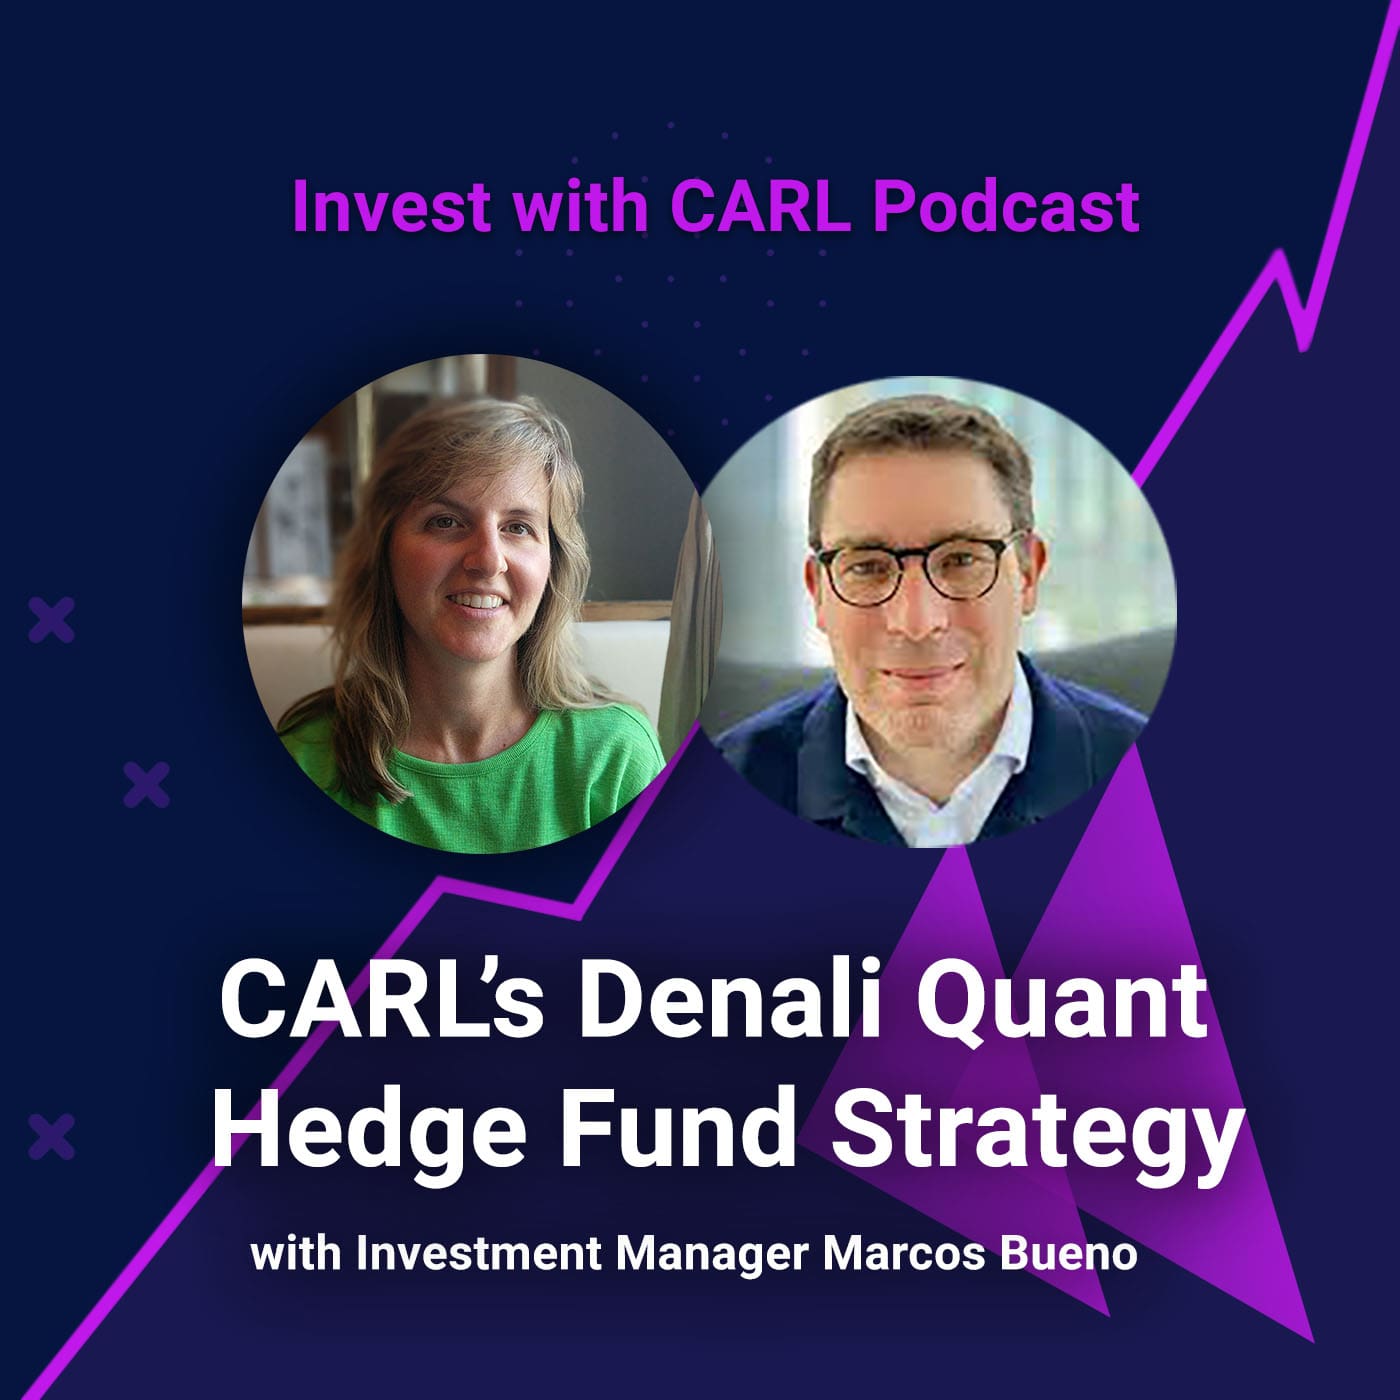 CARL’s Denali Quant Hedge Fund Strategy with Investment Manager Marcos Bueno